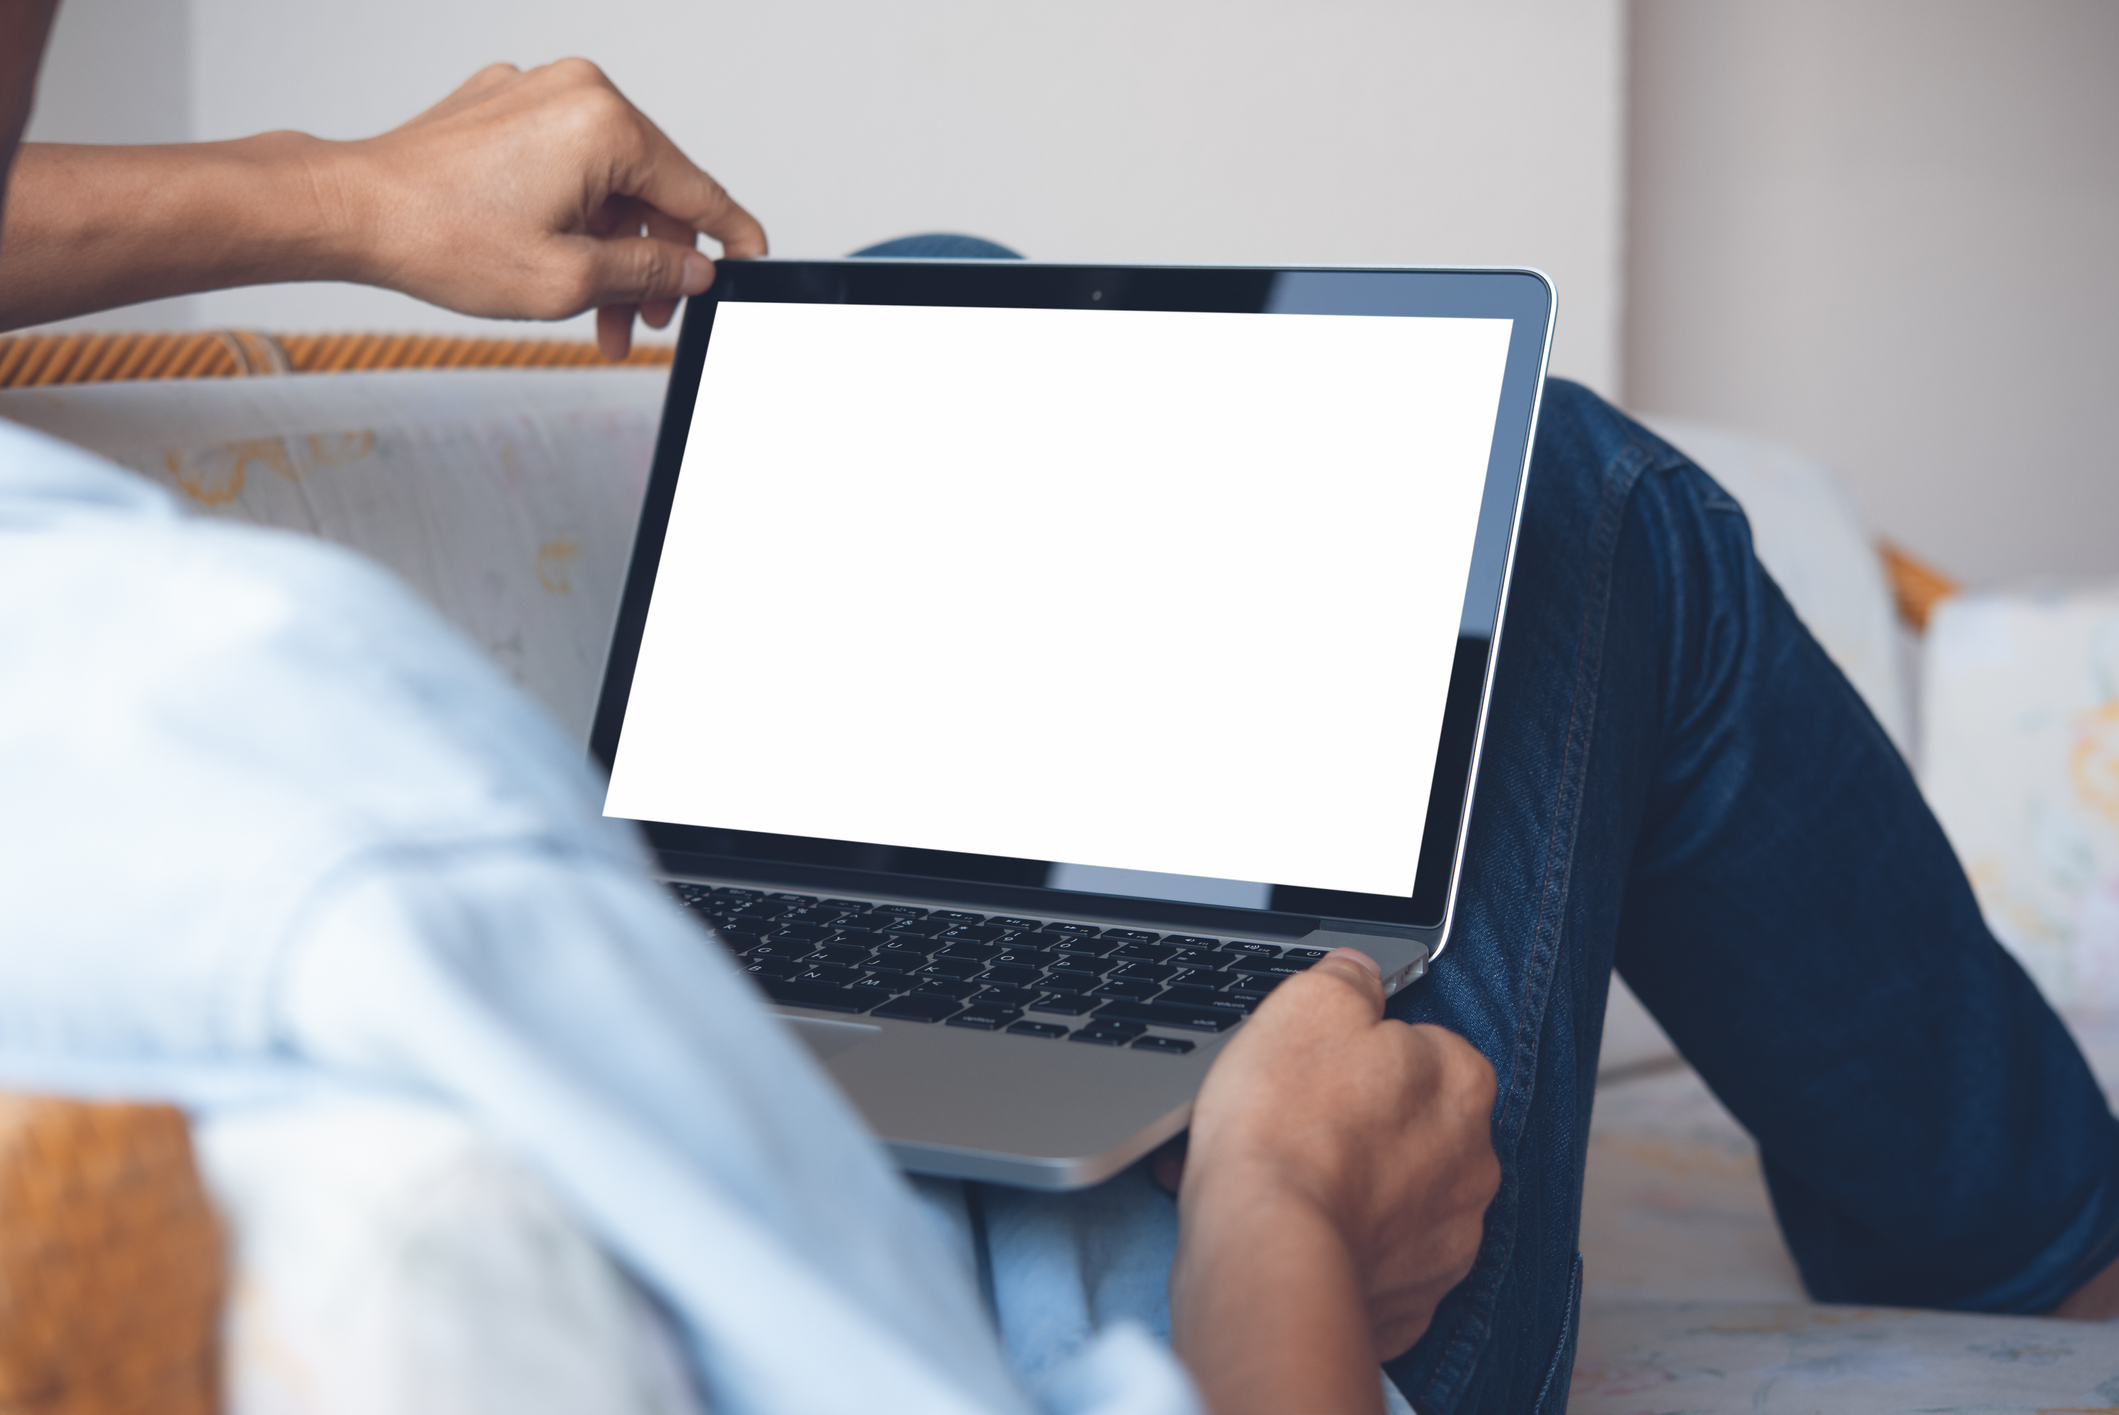 Mockup image of casual man leaning on sofa, relax using blank screen laptop computer at home or hotel room, over shoulder view, close up